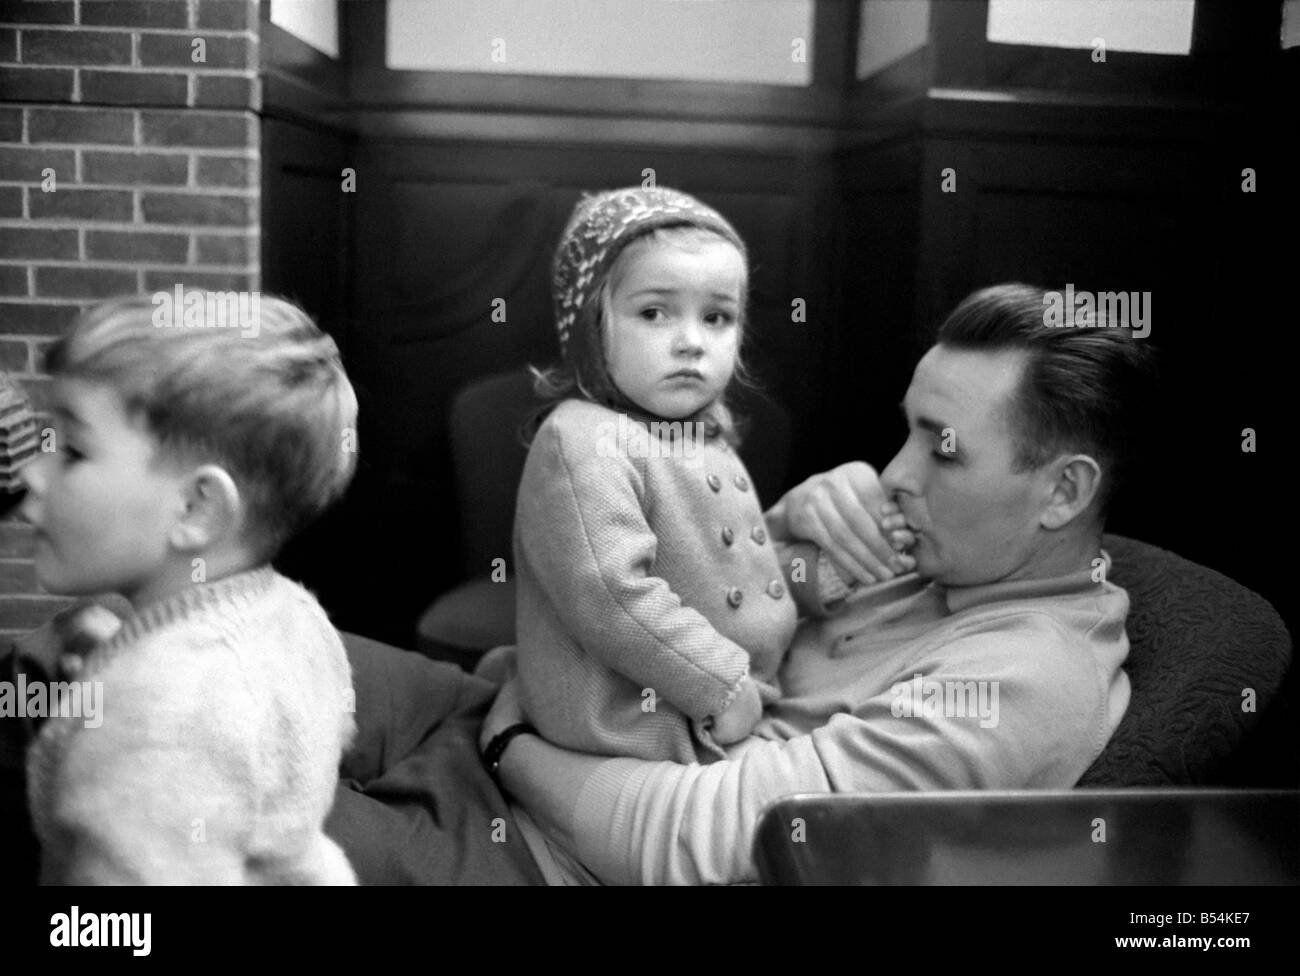 Sport: Football: Derby manager Brian Clough ponders the league cup draw the morning after his team's success at the baseball ground against Crystal Palace. Brian Clough with his two year old daughter Elizabeth watched by his son. October 1969 Z10423-004 Stock Photo